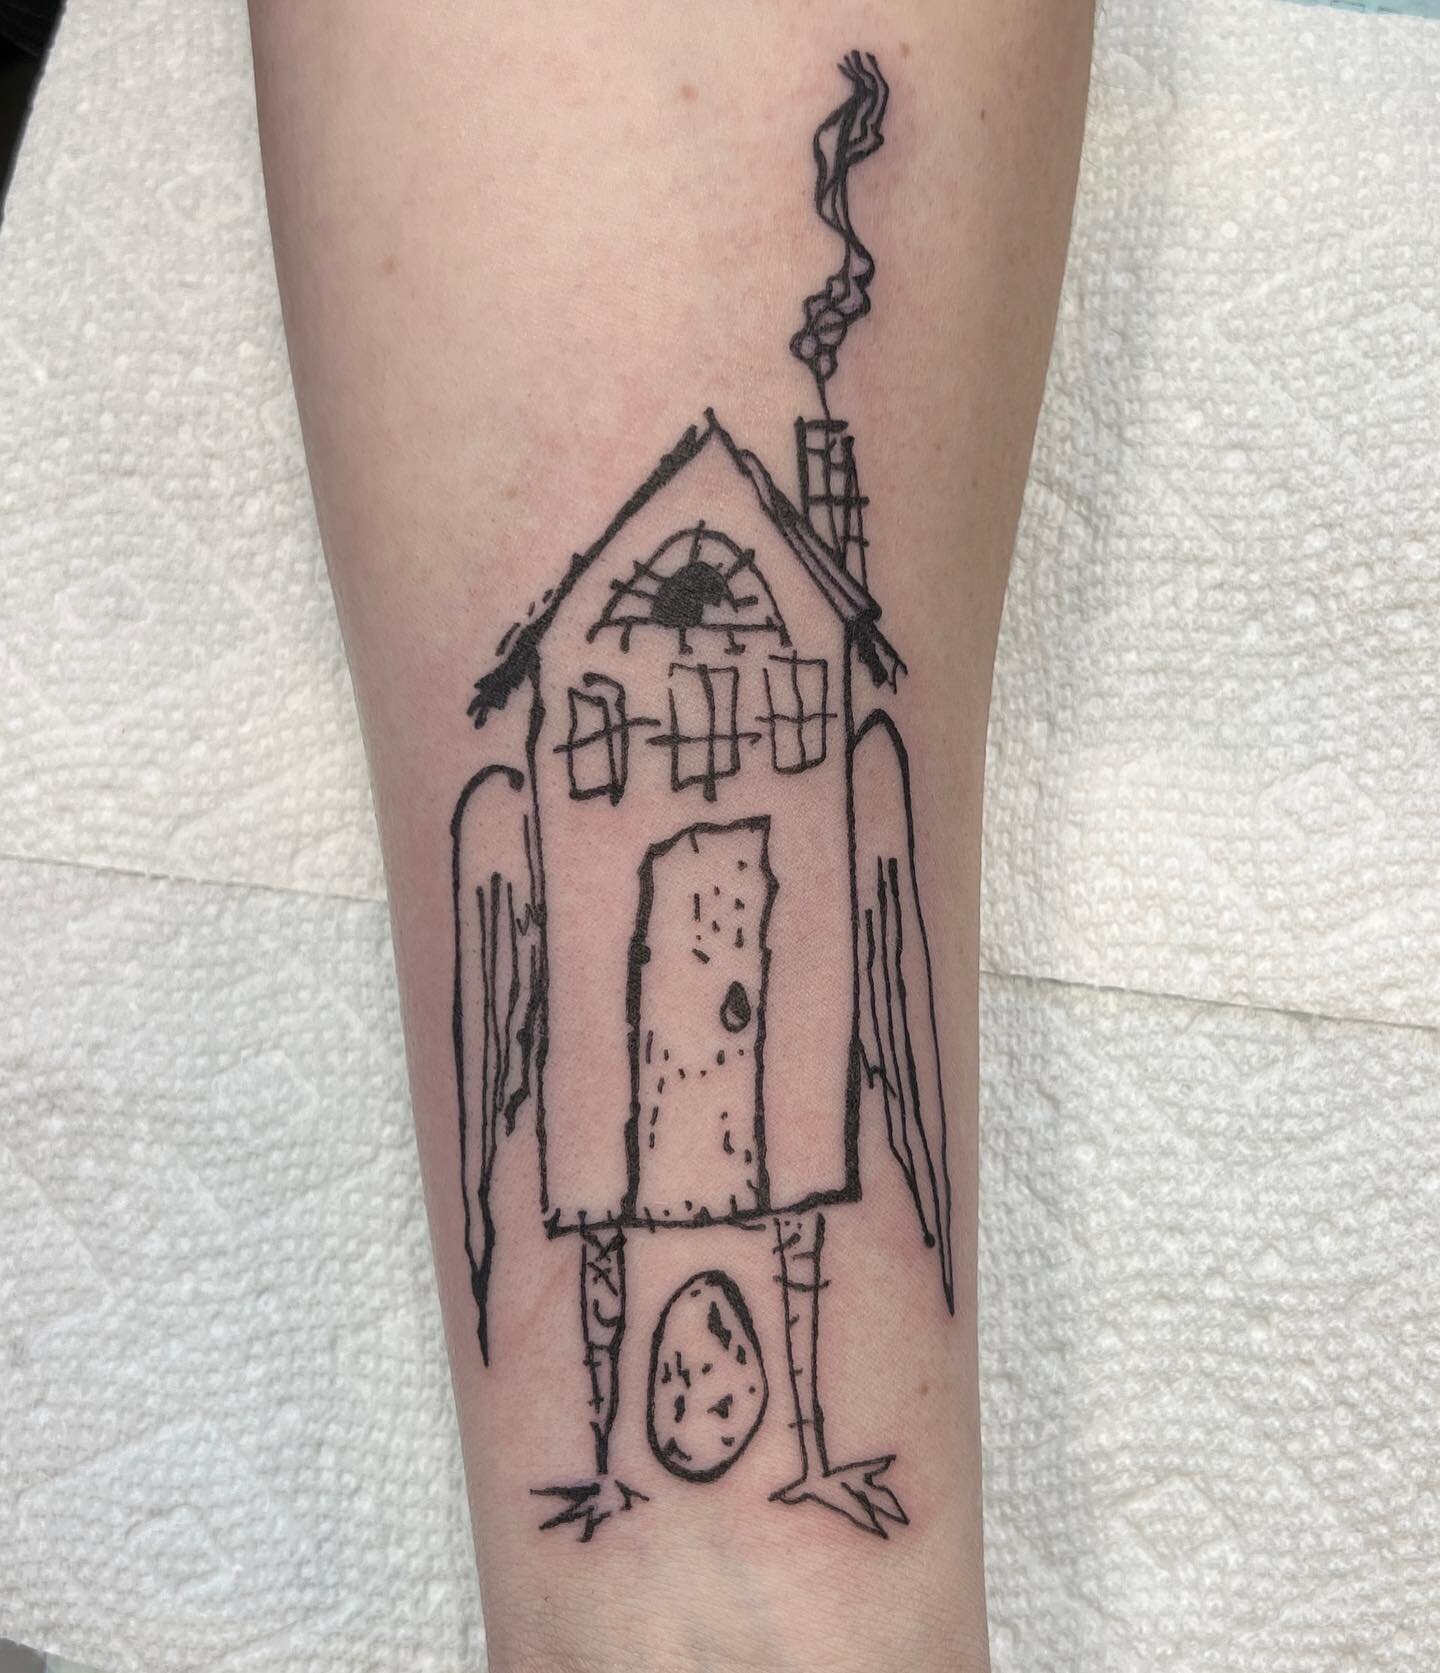 I did a little Baba Yaga house today and it reminded me that I never shared this one from earlier this year. 

I&rsquo;m going to go through some photos from this year and share some favorites that never made it to Instagram.

#bostontattooartist #qt